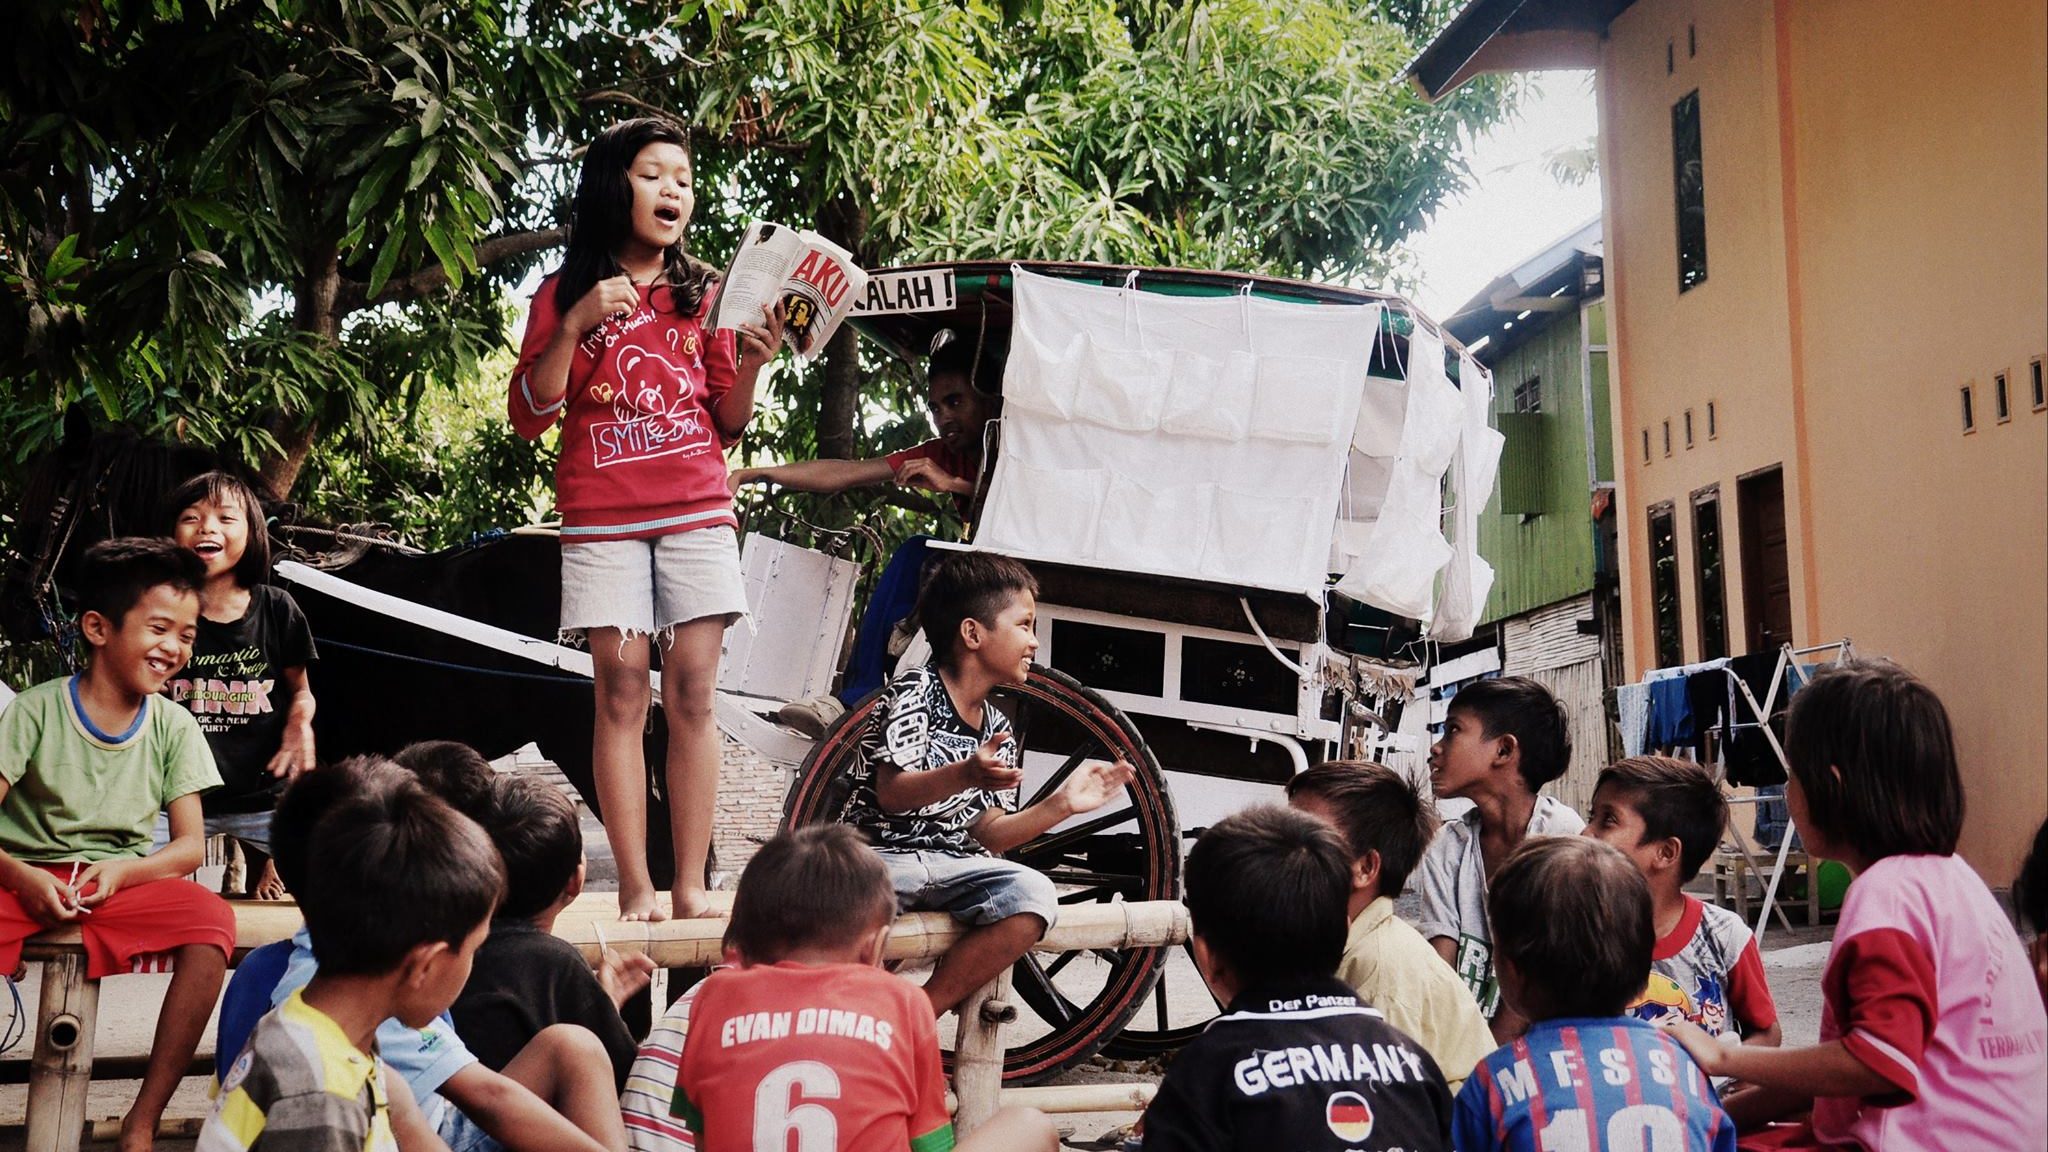 A girl is standing on a platform in front of a horse-cart and some trees, she is surrounded by other children sitting, laughing and listening as she reads out-loud from a book.